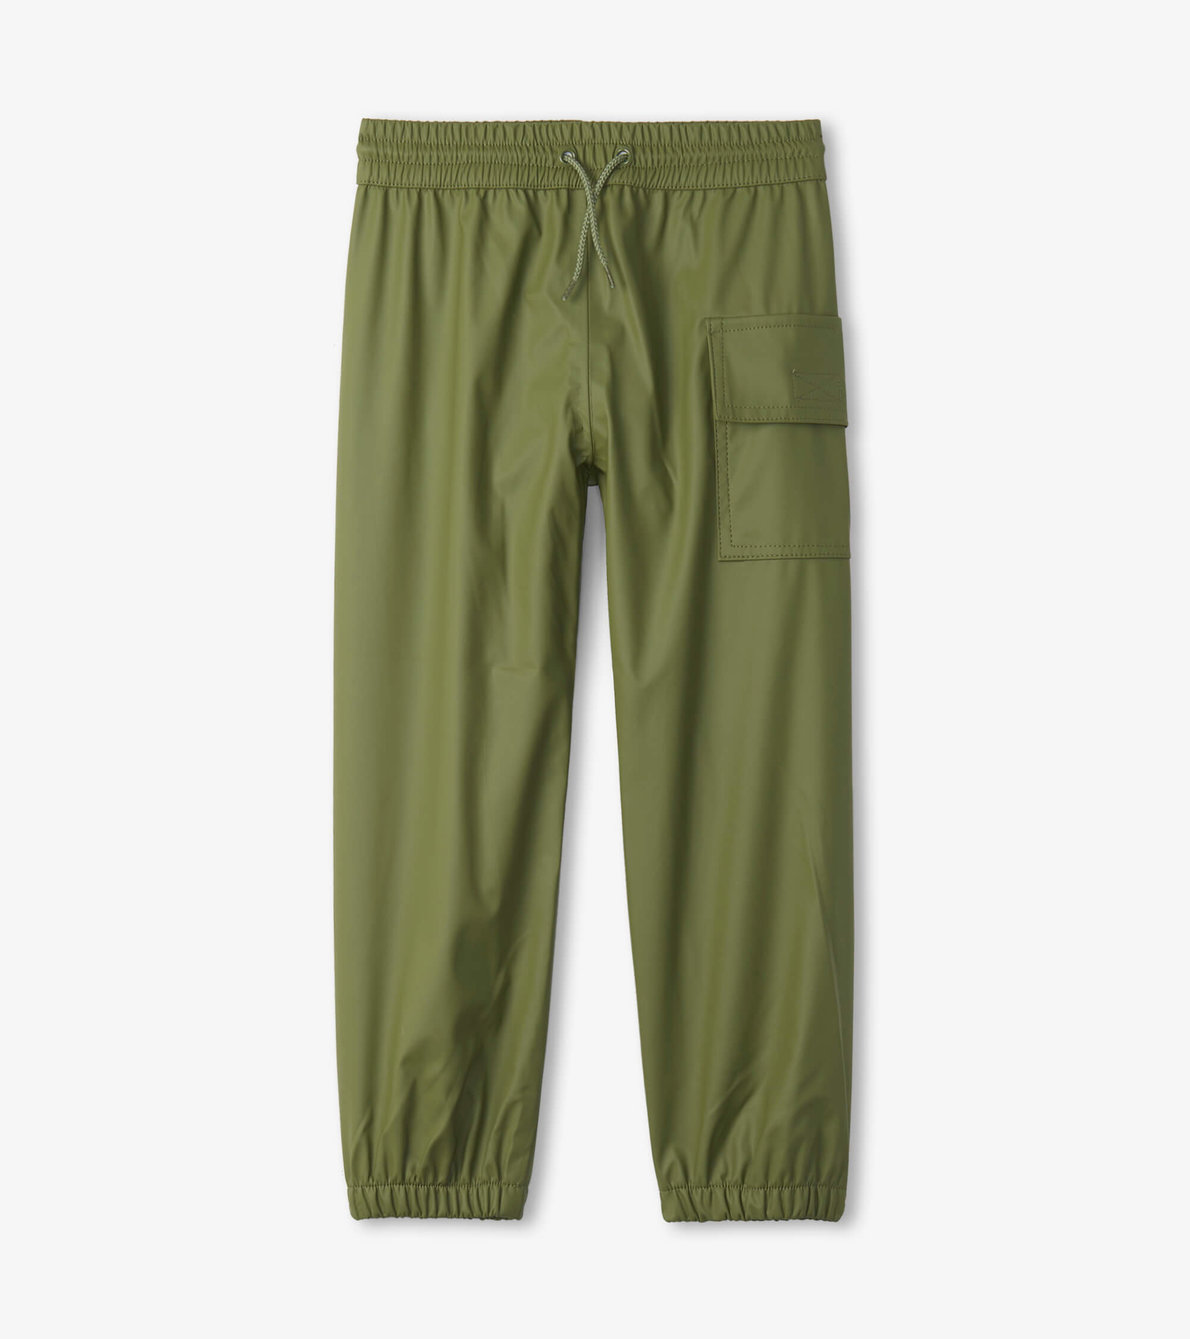 View larger image of Forest Green Splash Pants